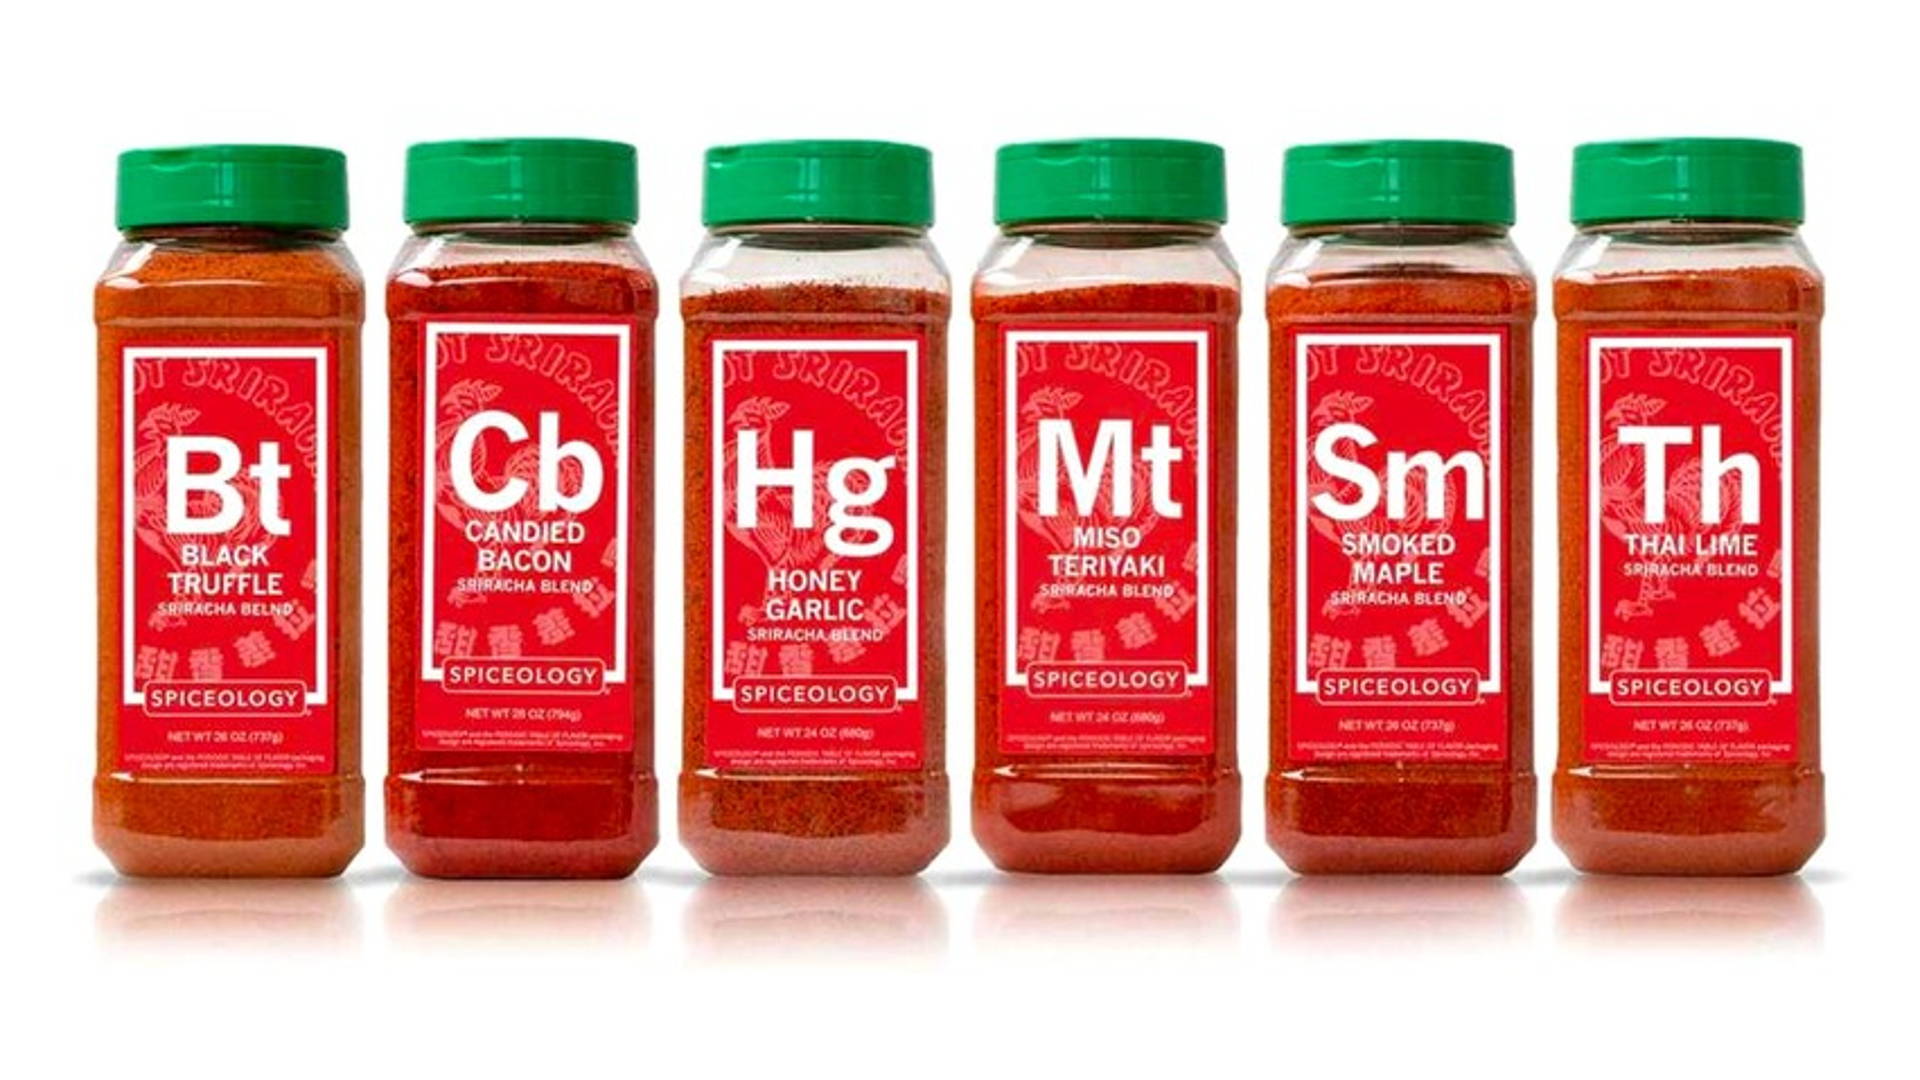 Featured image for Huy Fong And Spiceology Team Up For Sriracha Dry Spice Line